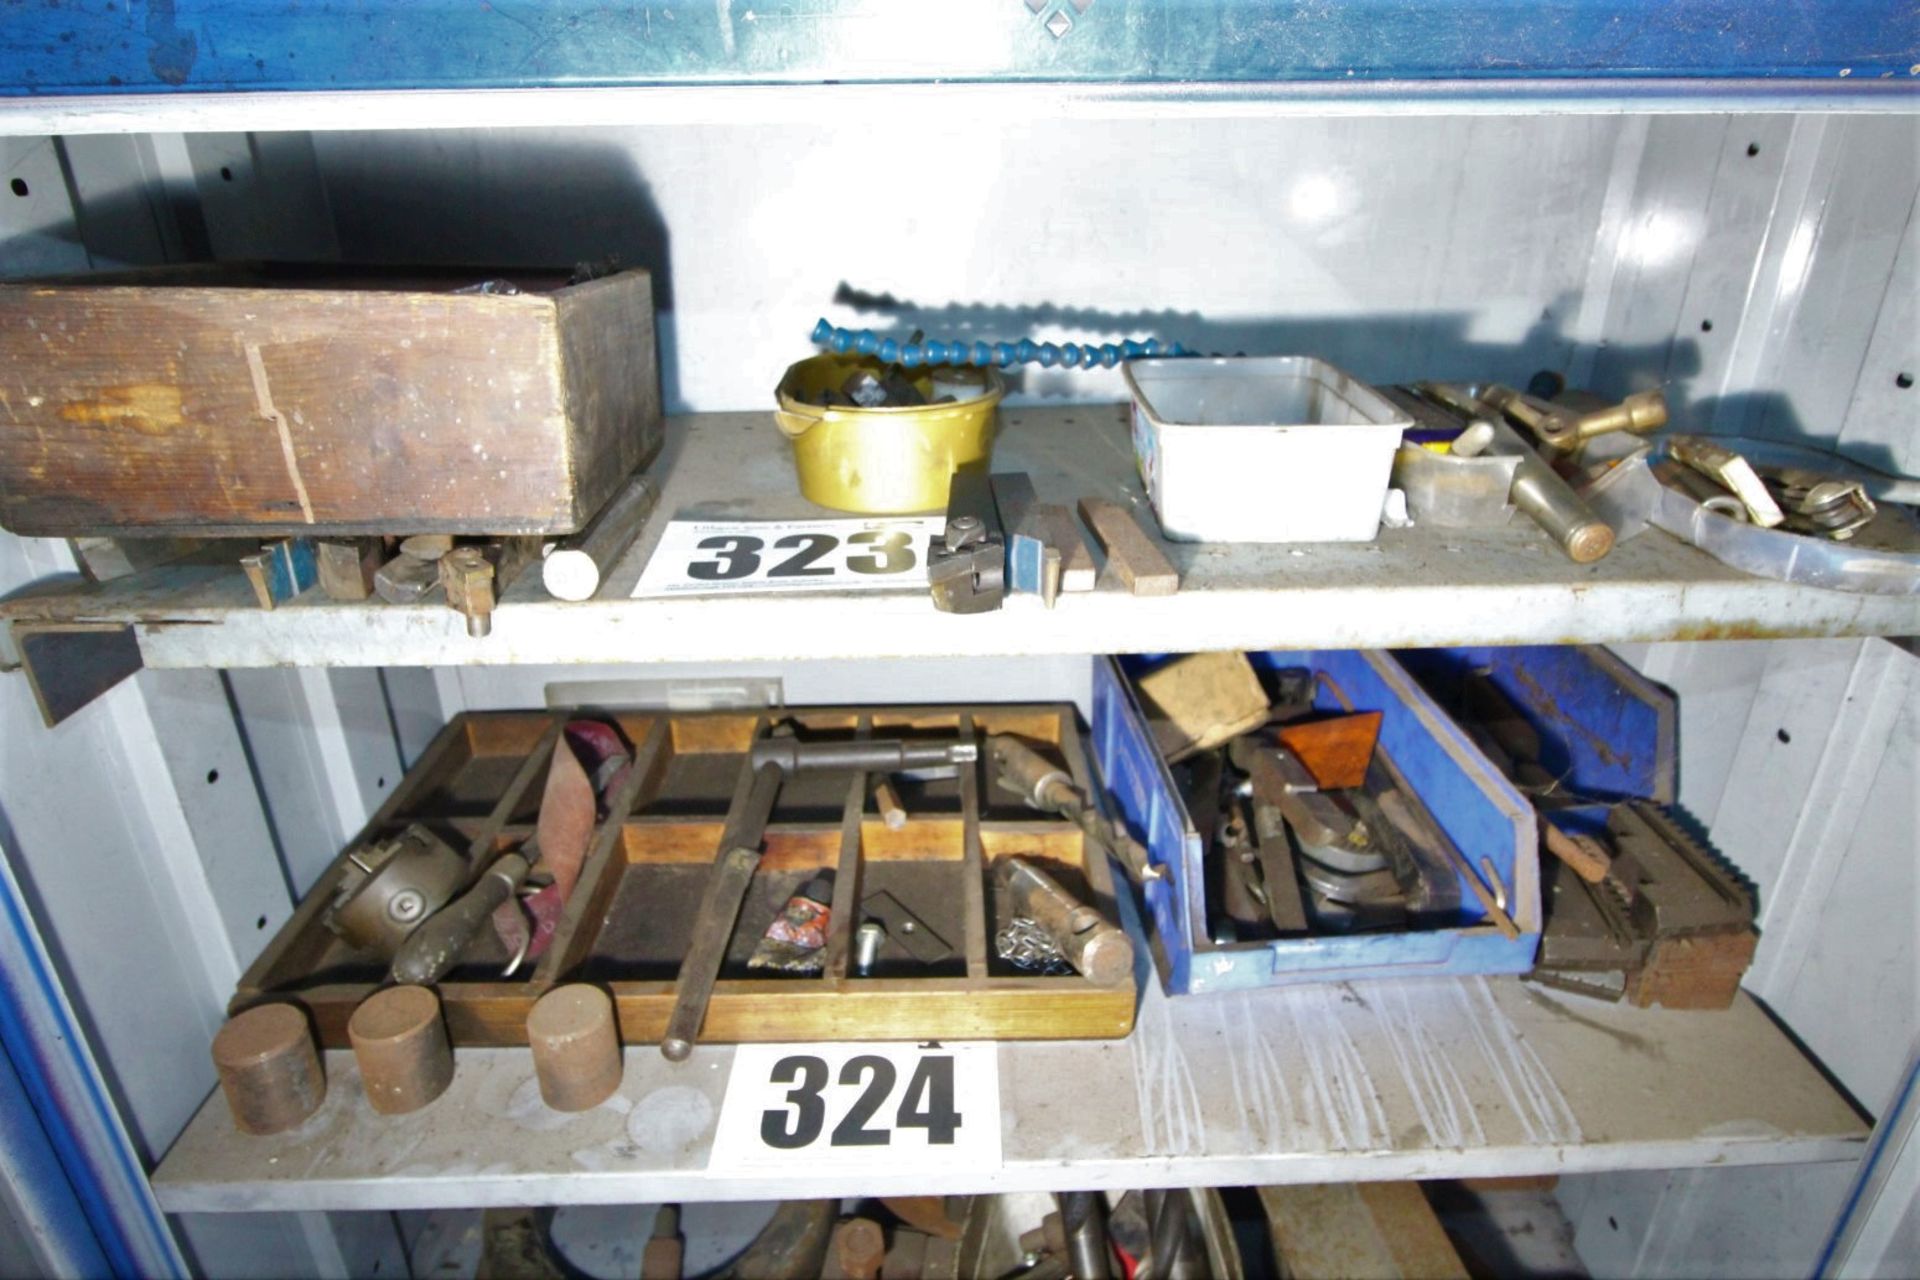 CONTENTS ON TOP SHELF OF CABINET OF LATHE TOOLS